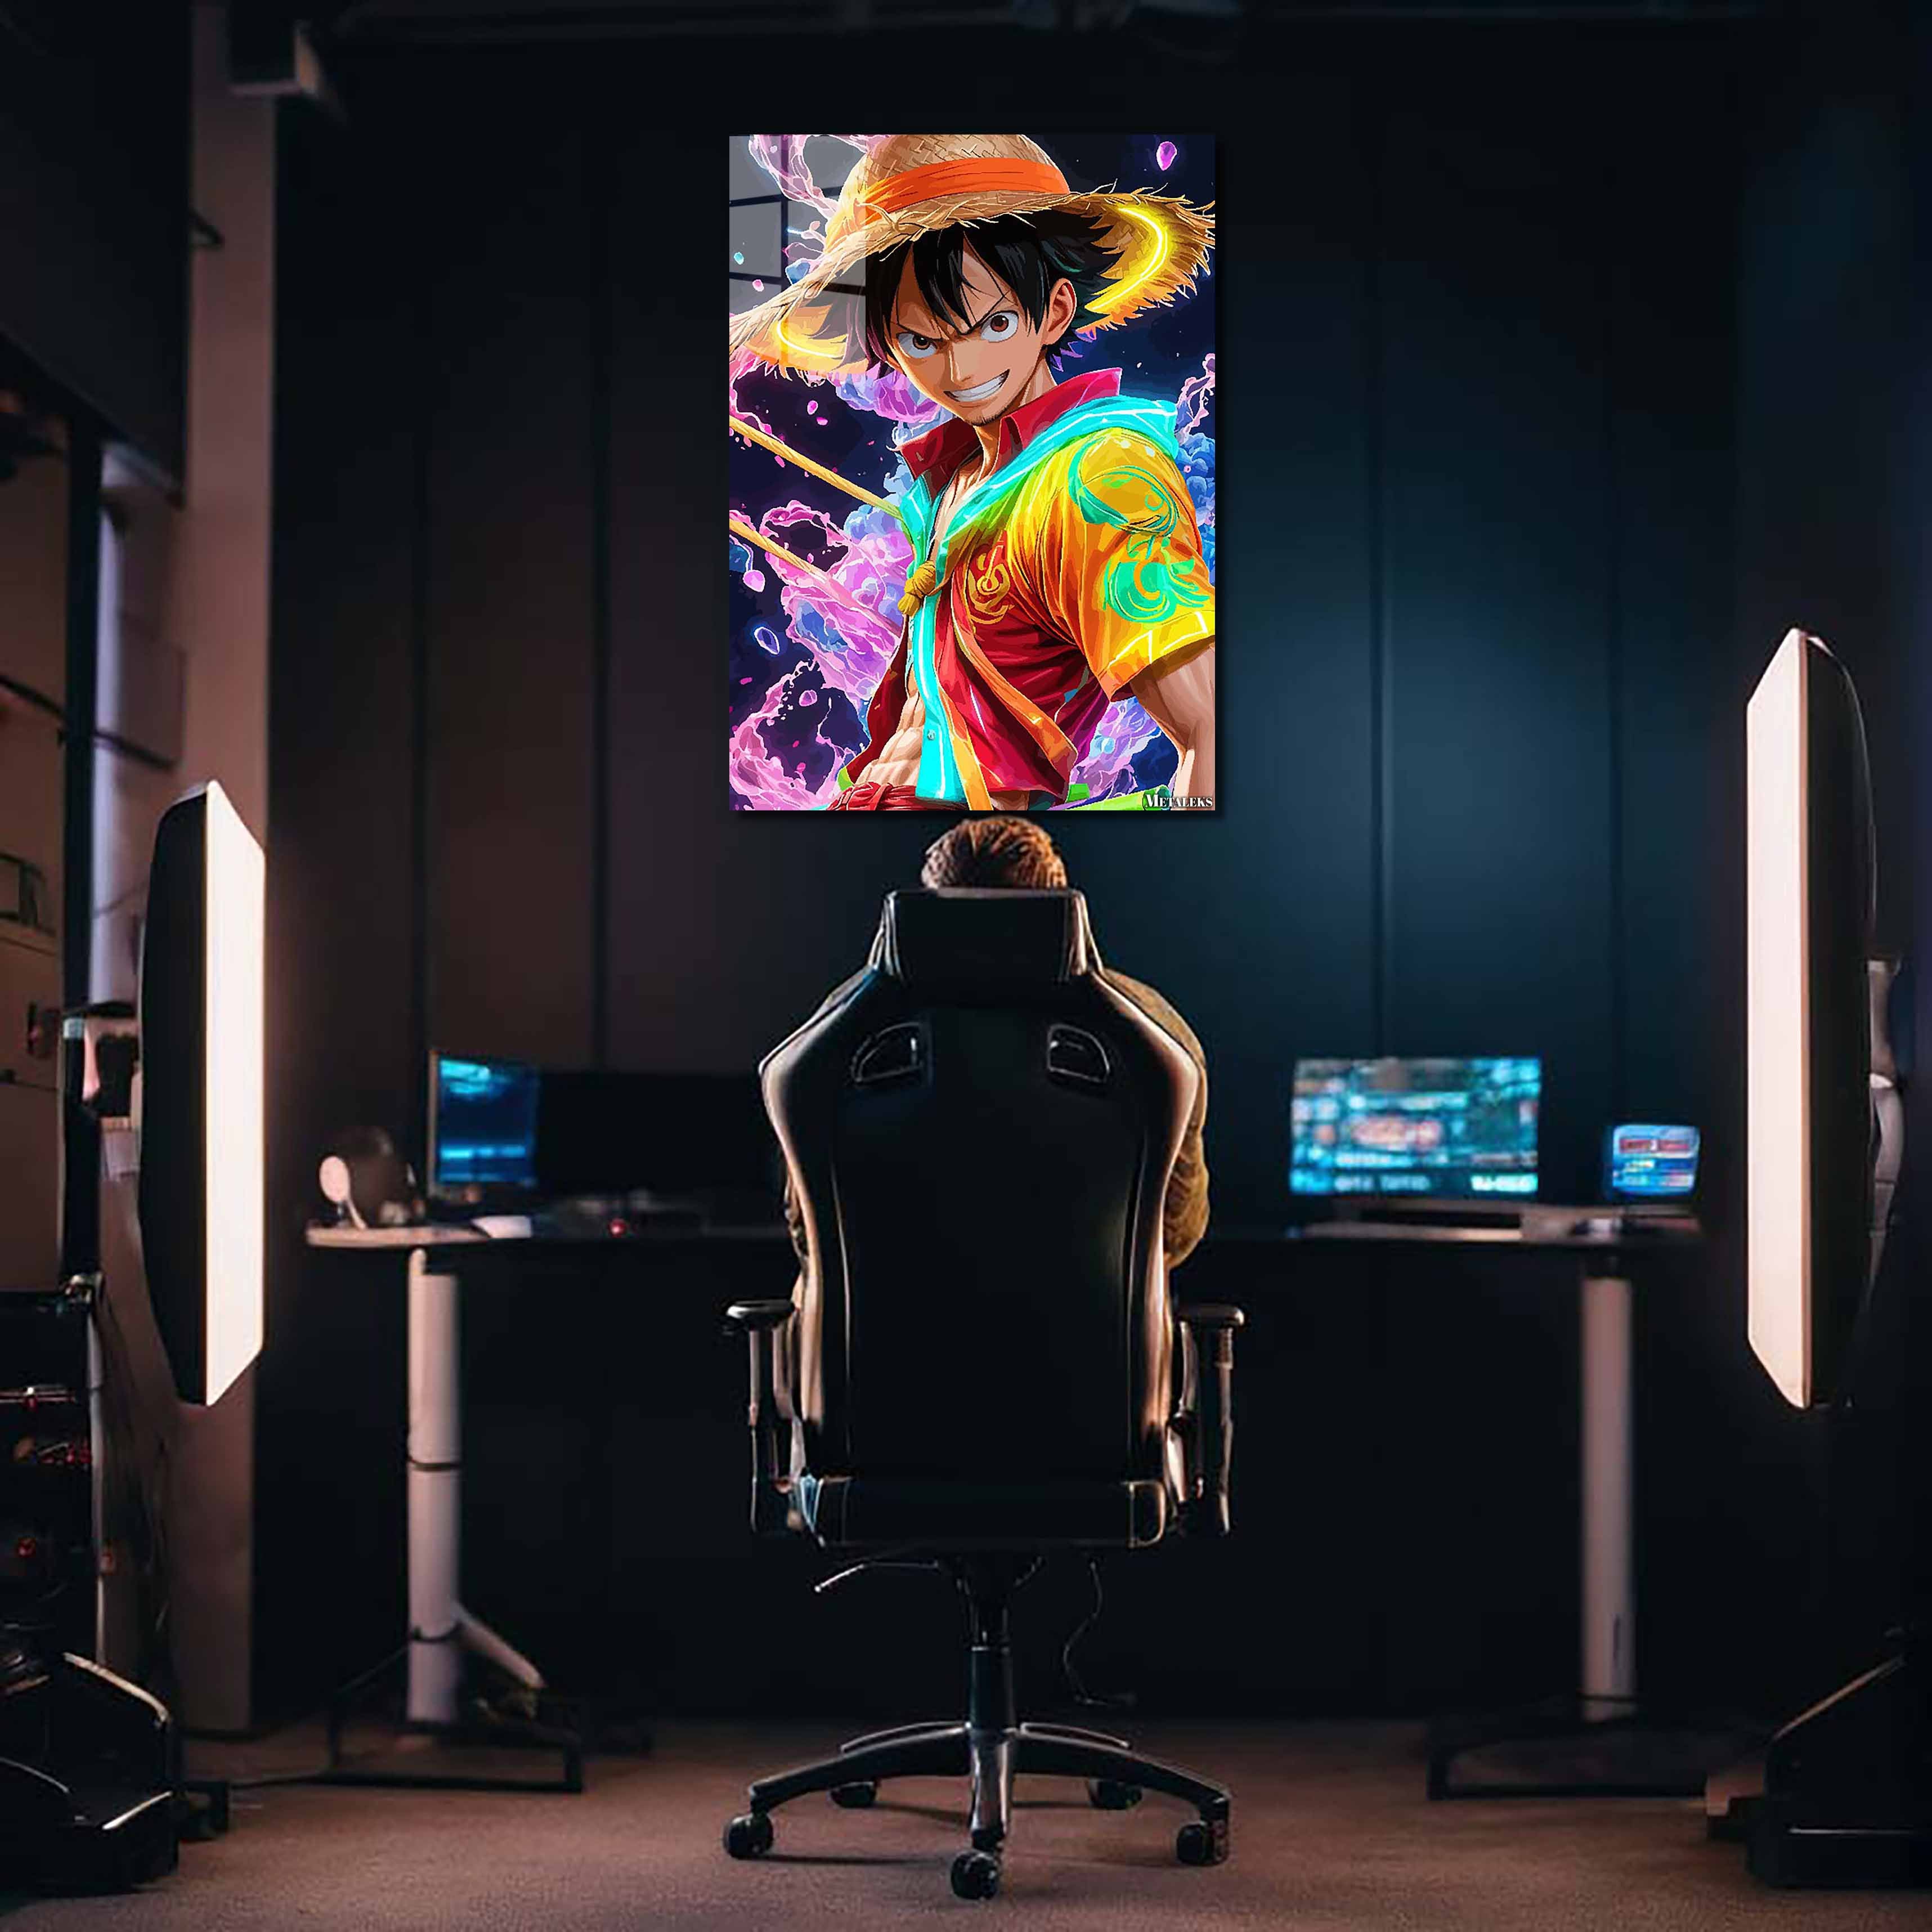 Monkey d luffy colorful theme-designed by @Sheshh